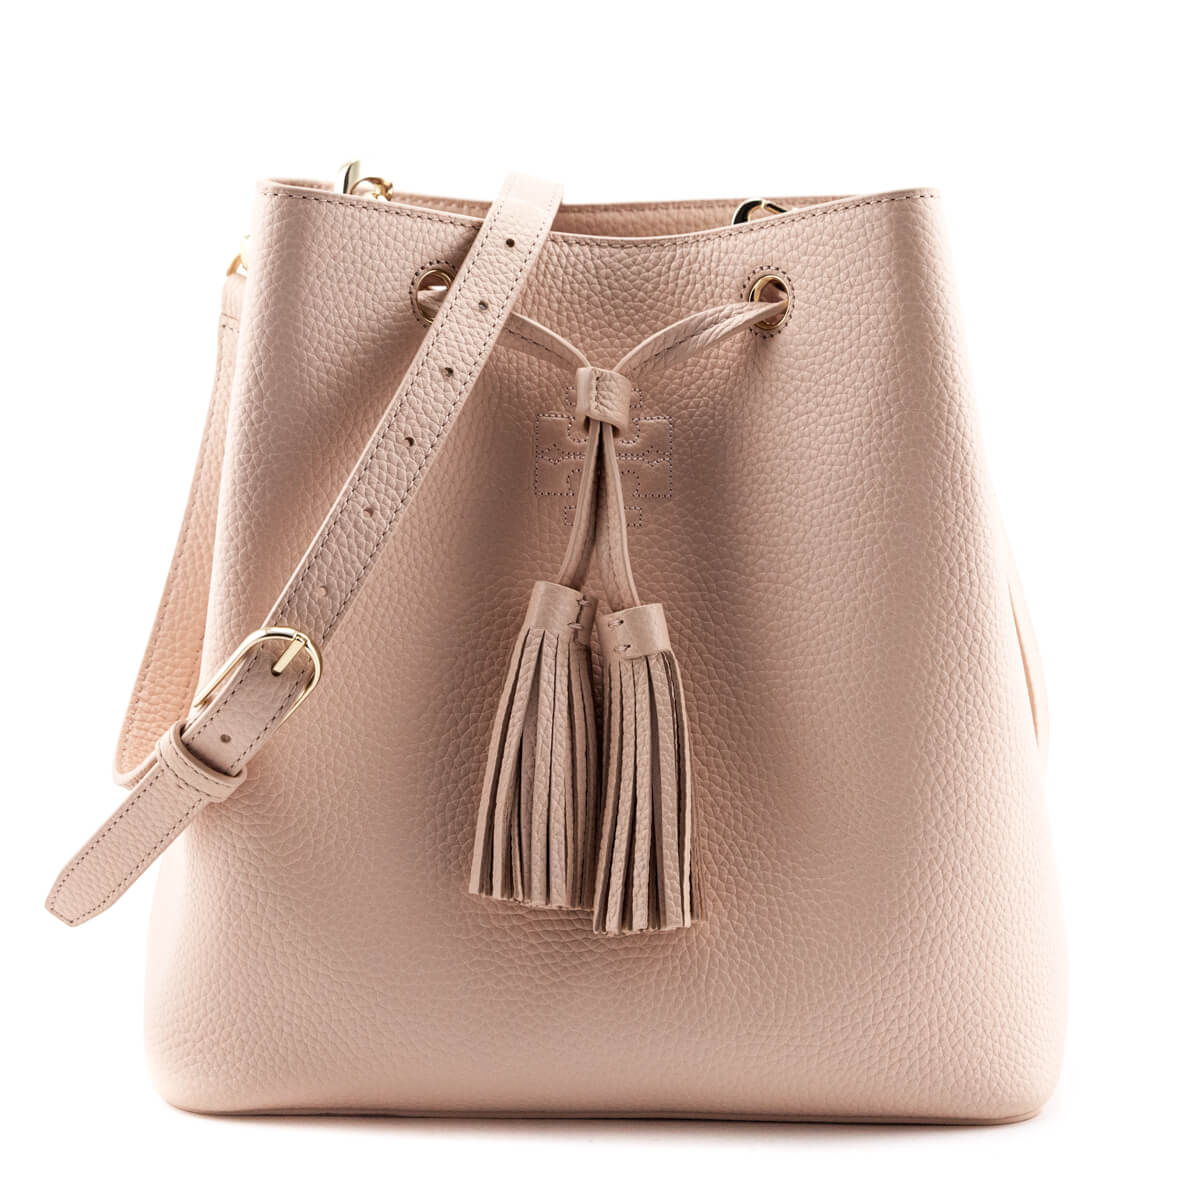 Tory Burch Sweet Melon Leather Thea Bucket Bag - Consign Tory Burch CA